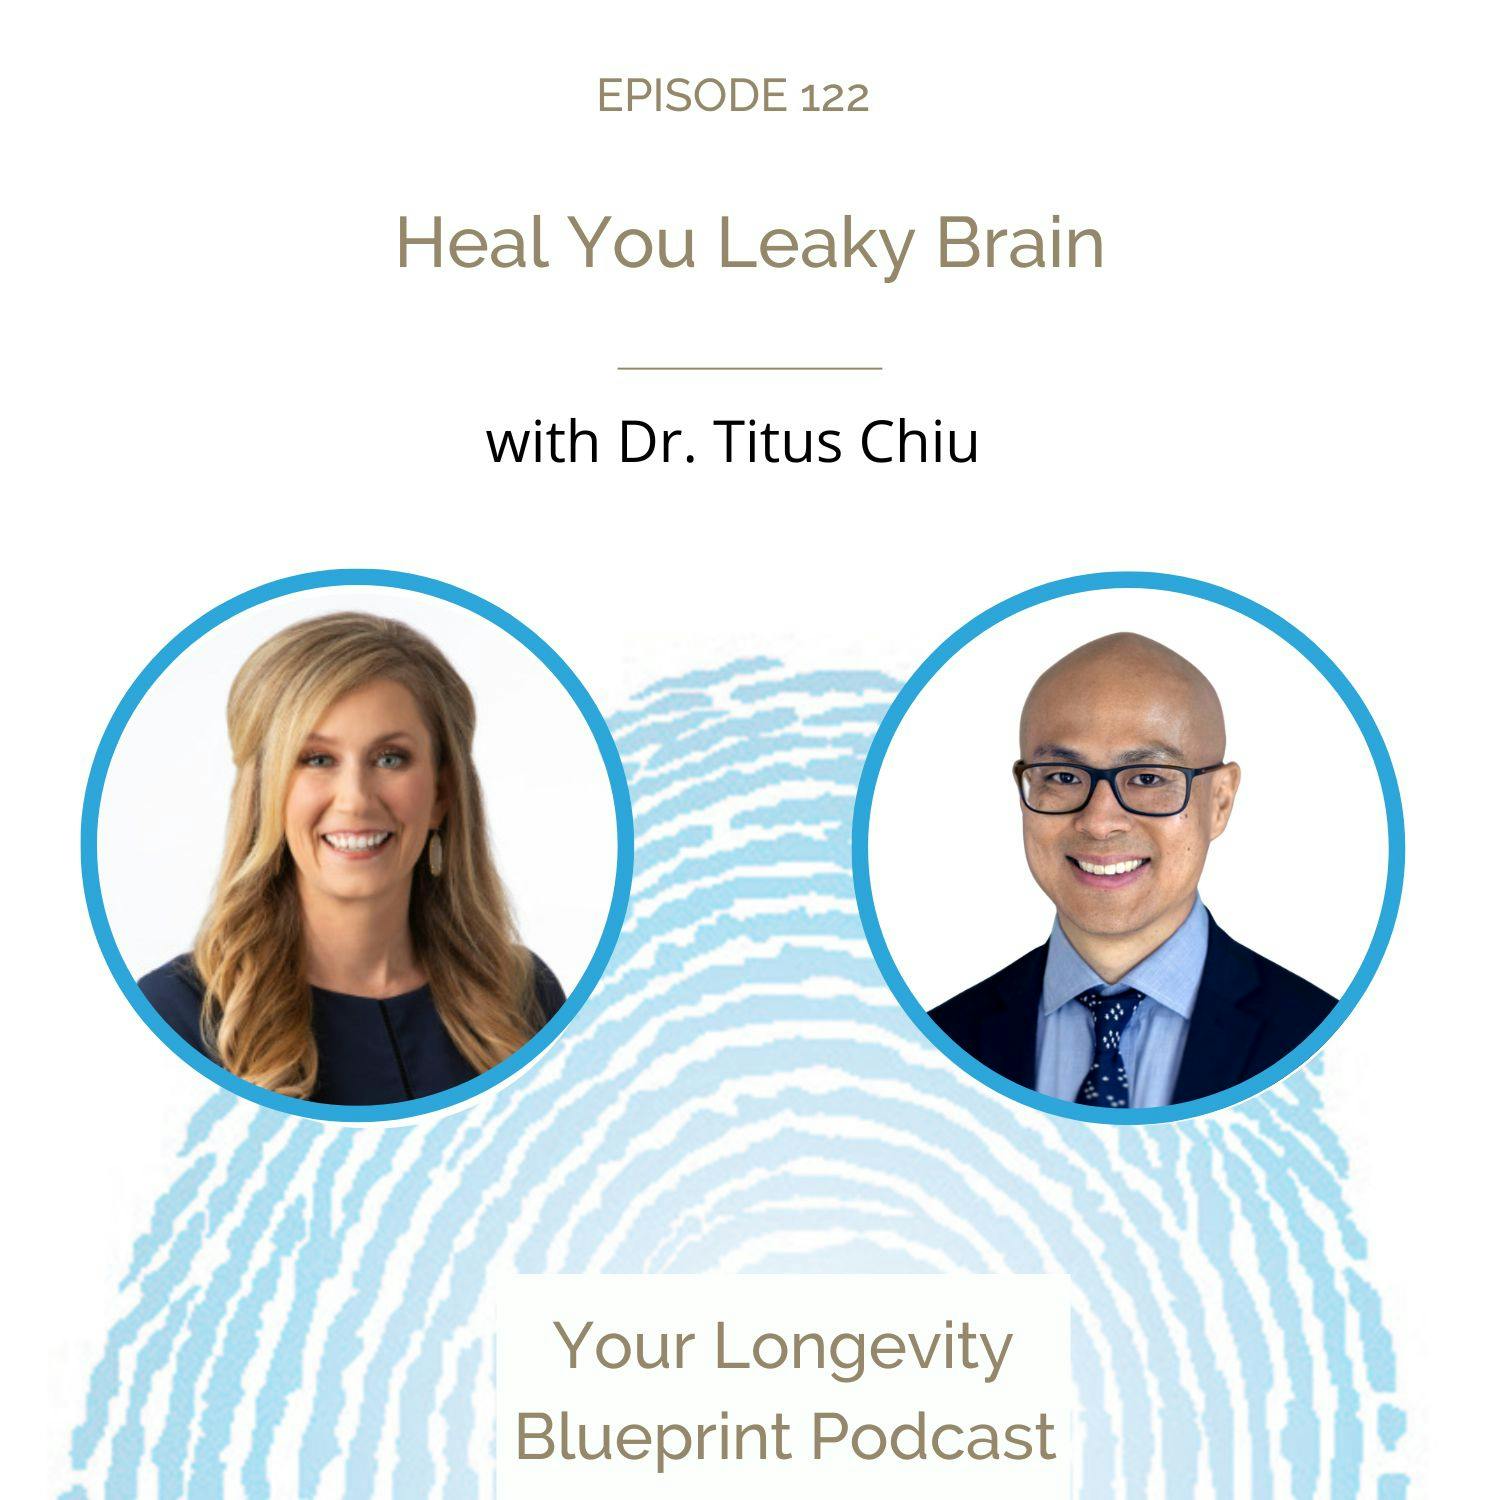 Heal Your Leaky Brain with Dr. Titus Chiu